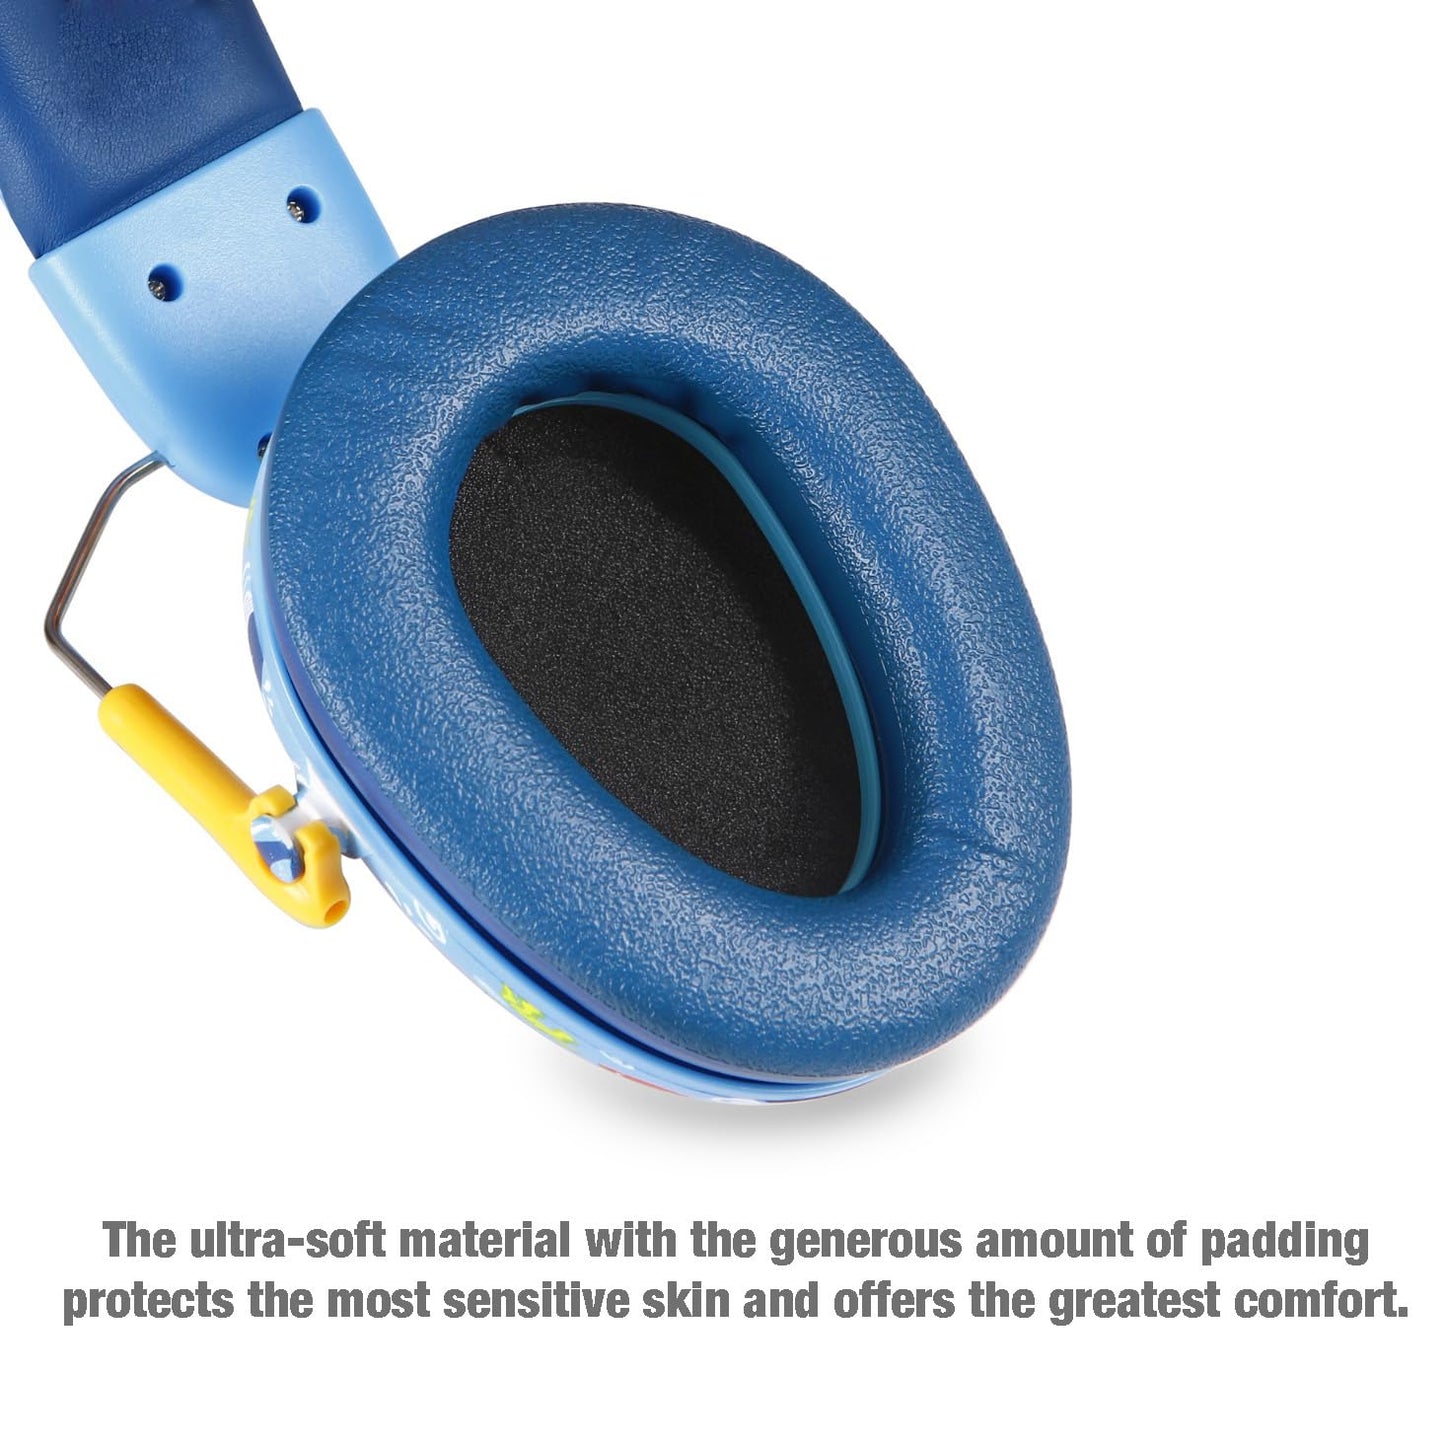 PandaEar Kids Ear Protection Noise Cancelling HeadPhones, NRR 28dB Hearing Protection Earmuffs for Autism, Children, Toddler, Safety Ear Muffs for Sport Games, Concerts, Fireworks (Blue)